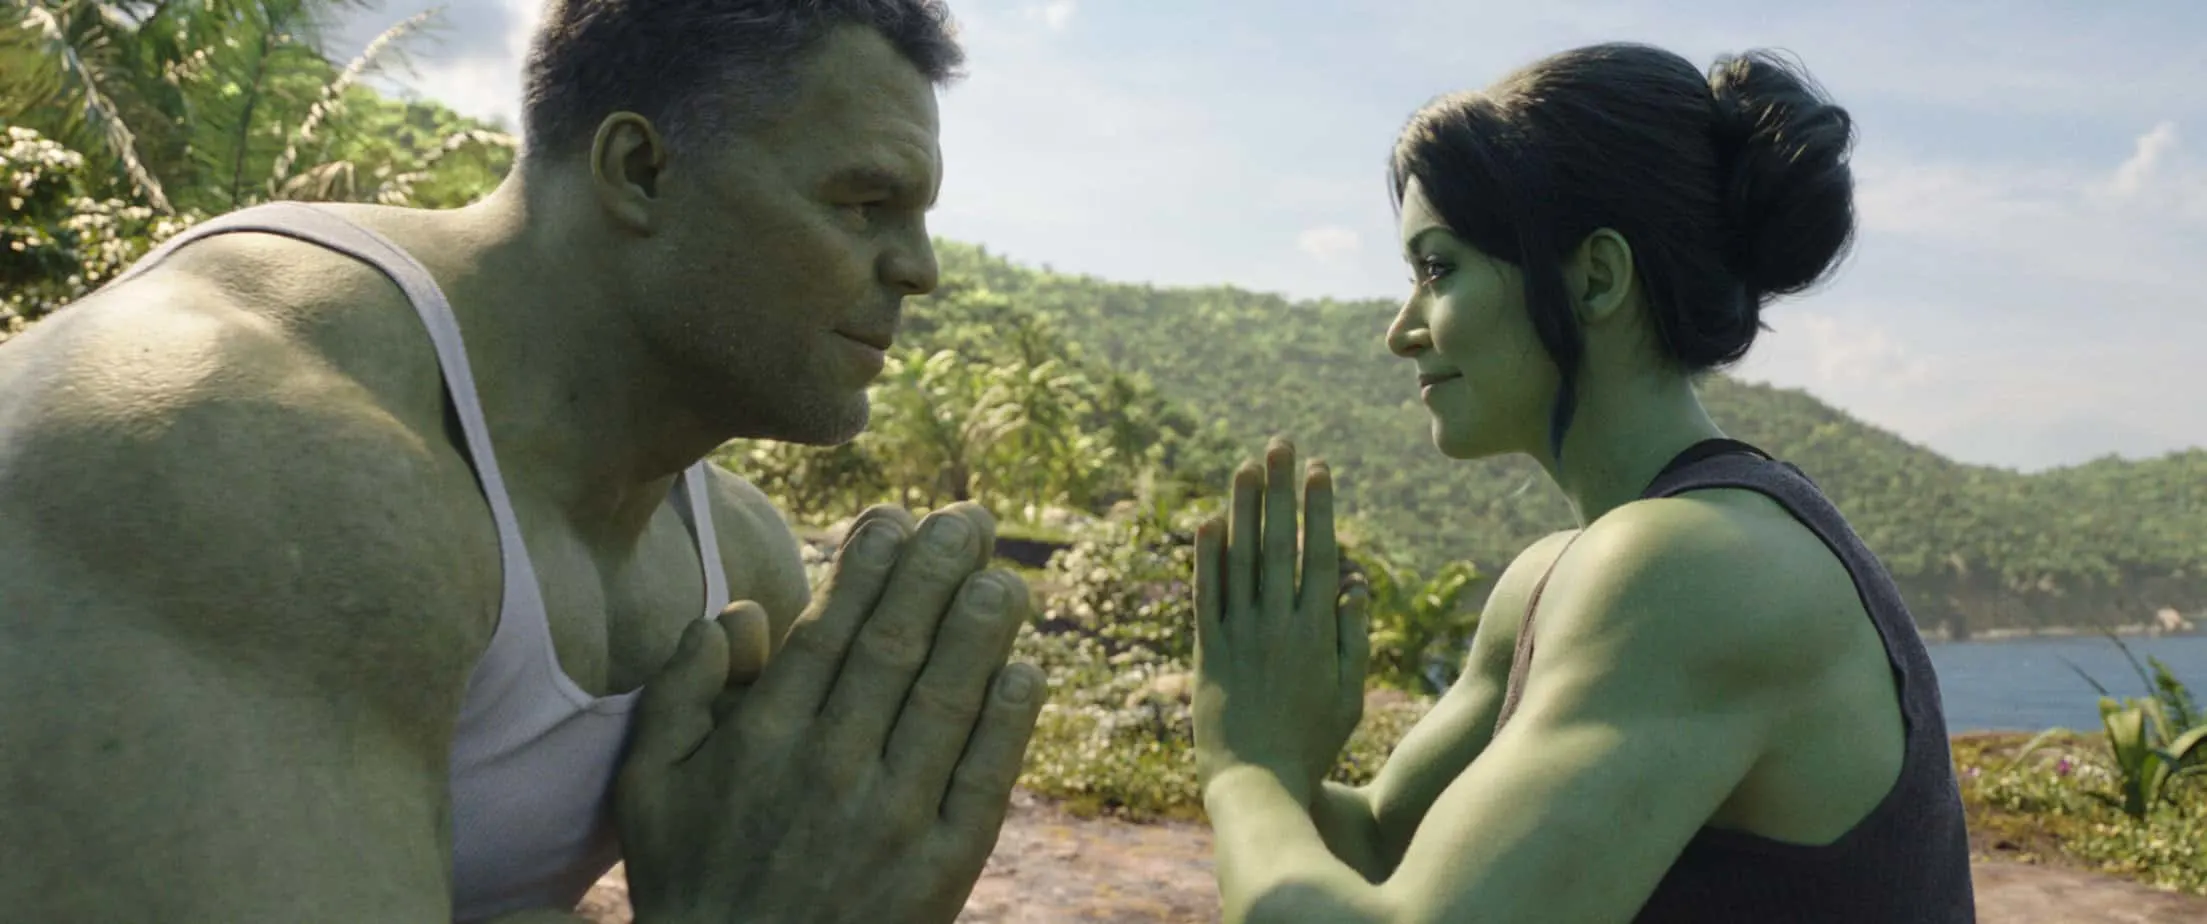 Hulk (Large green man) and SheHulk (Large green woman) are bowing to each other out in nature. Quotes from SheHulk